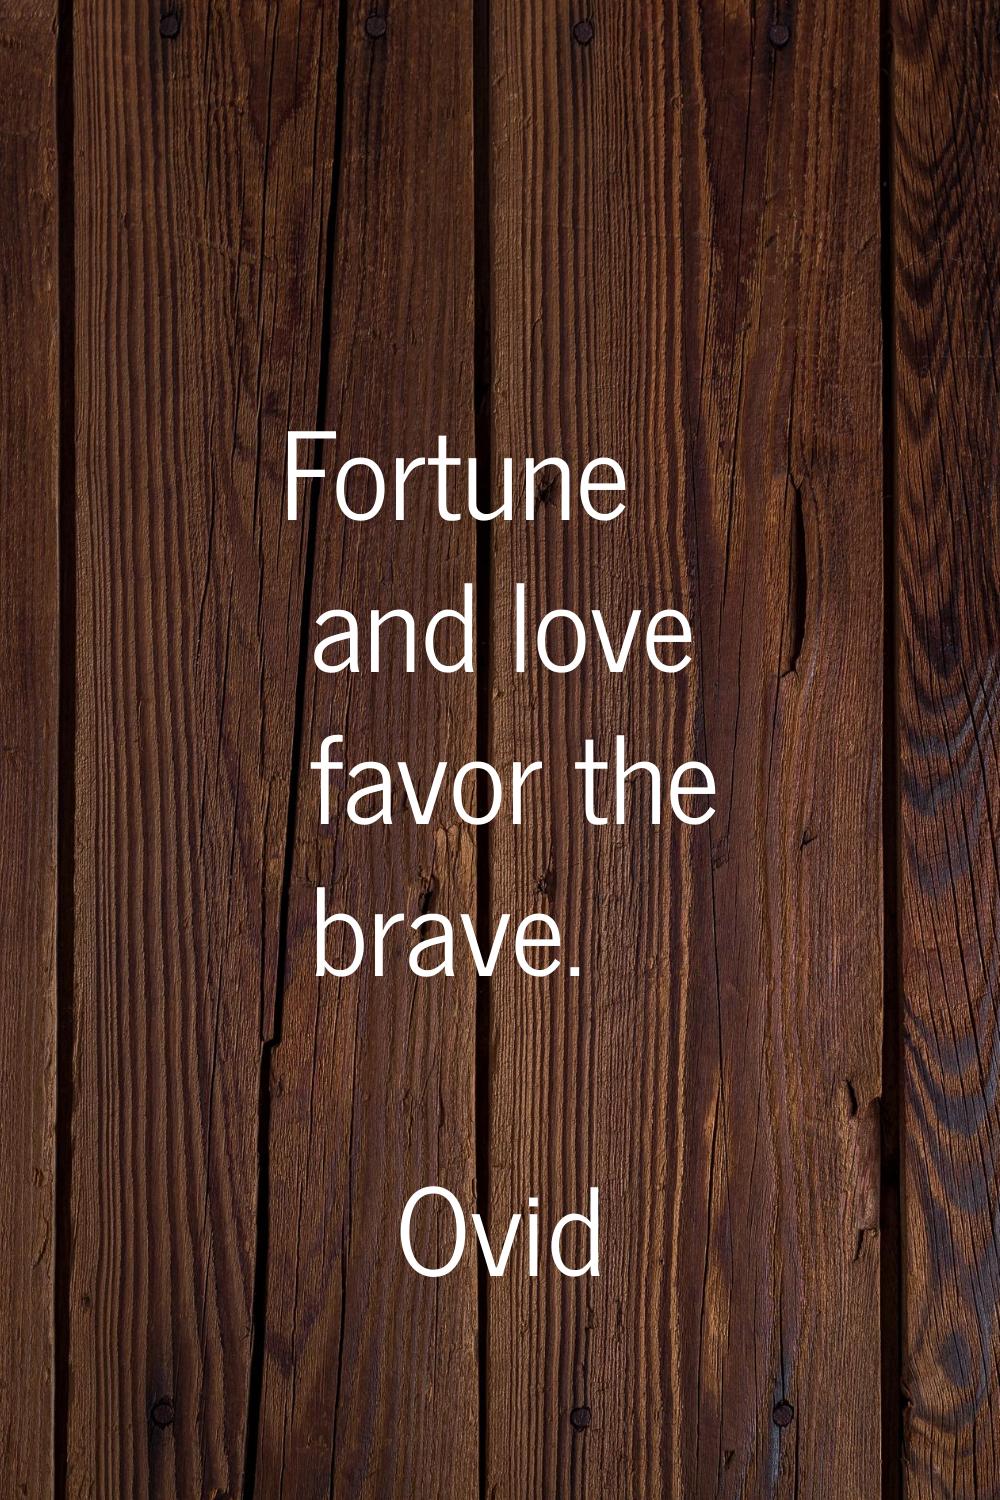 Fortune and love favor the brave.